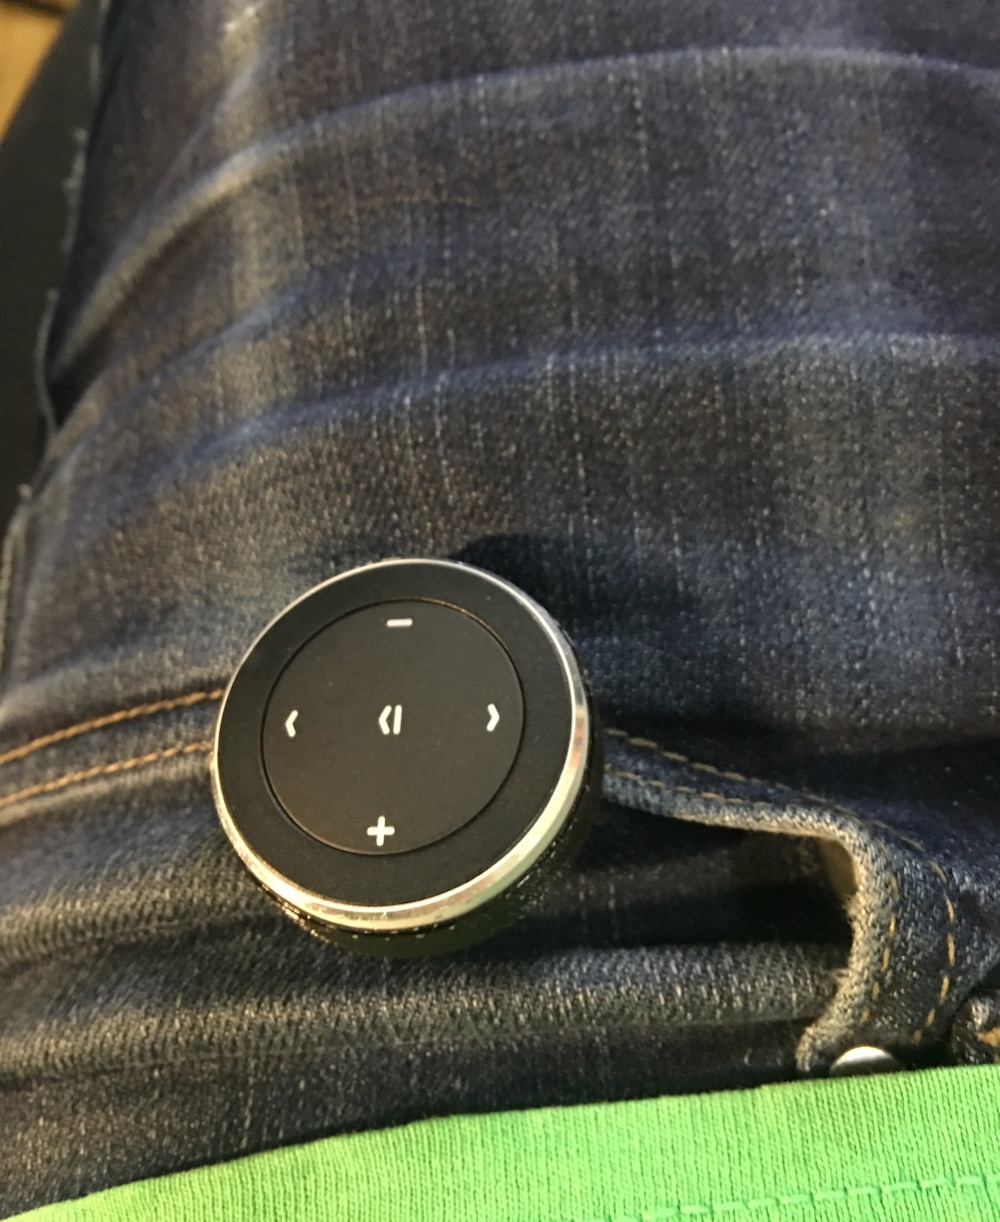 Bluetooth remote clipped to my pants